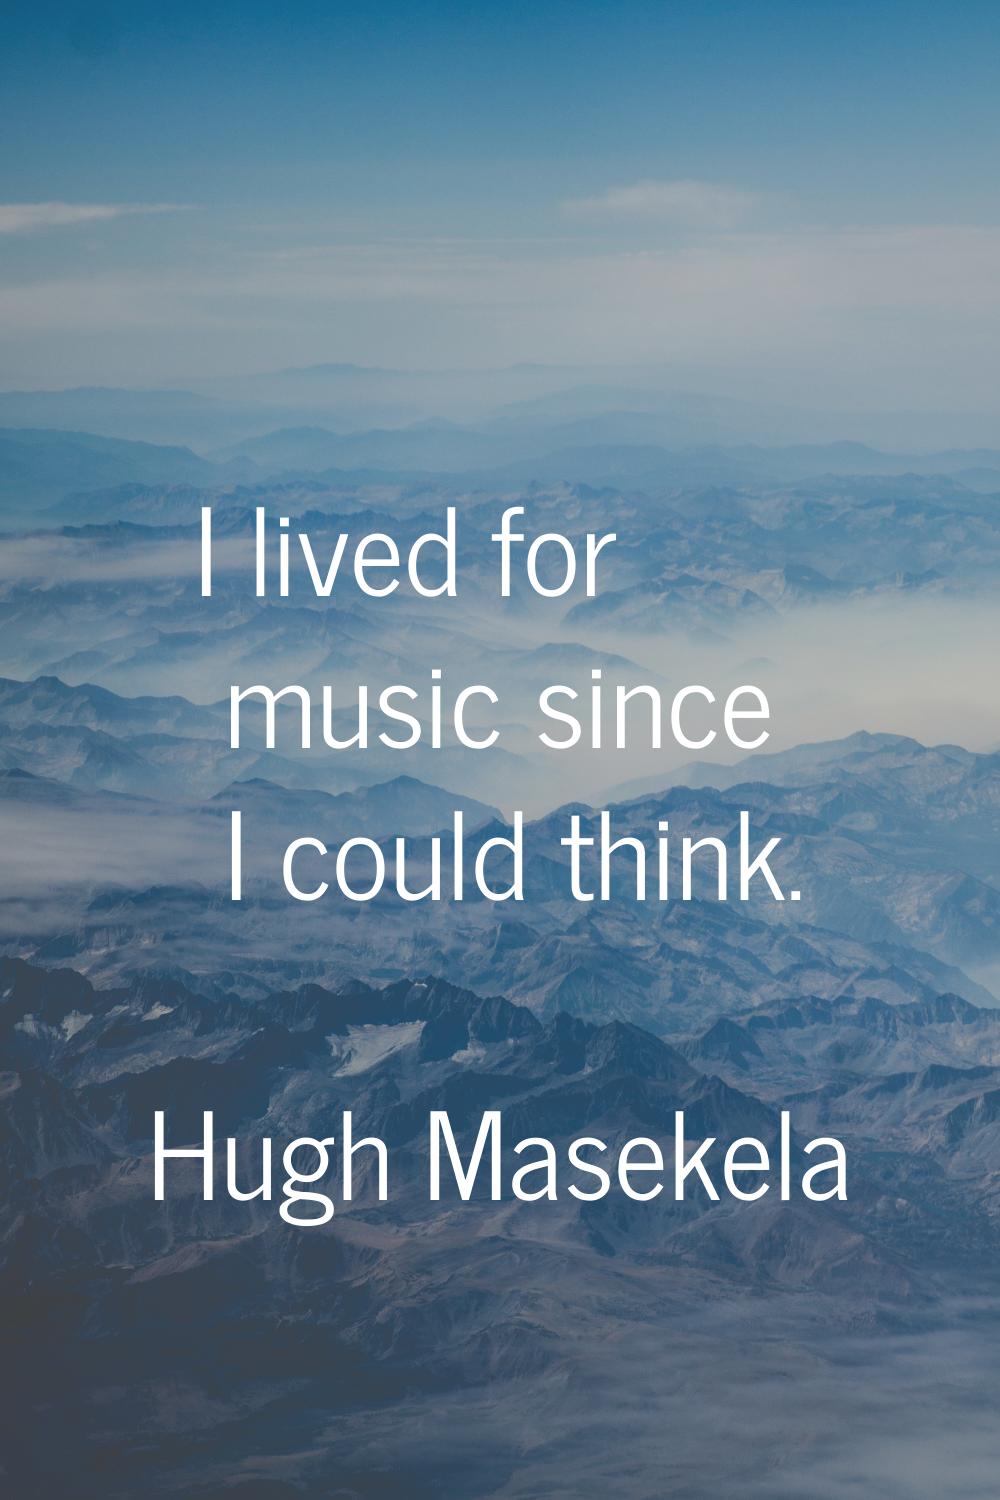 I lived for music since I could think.